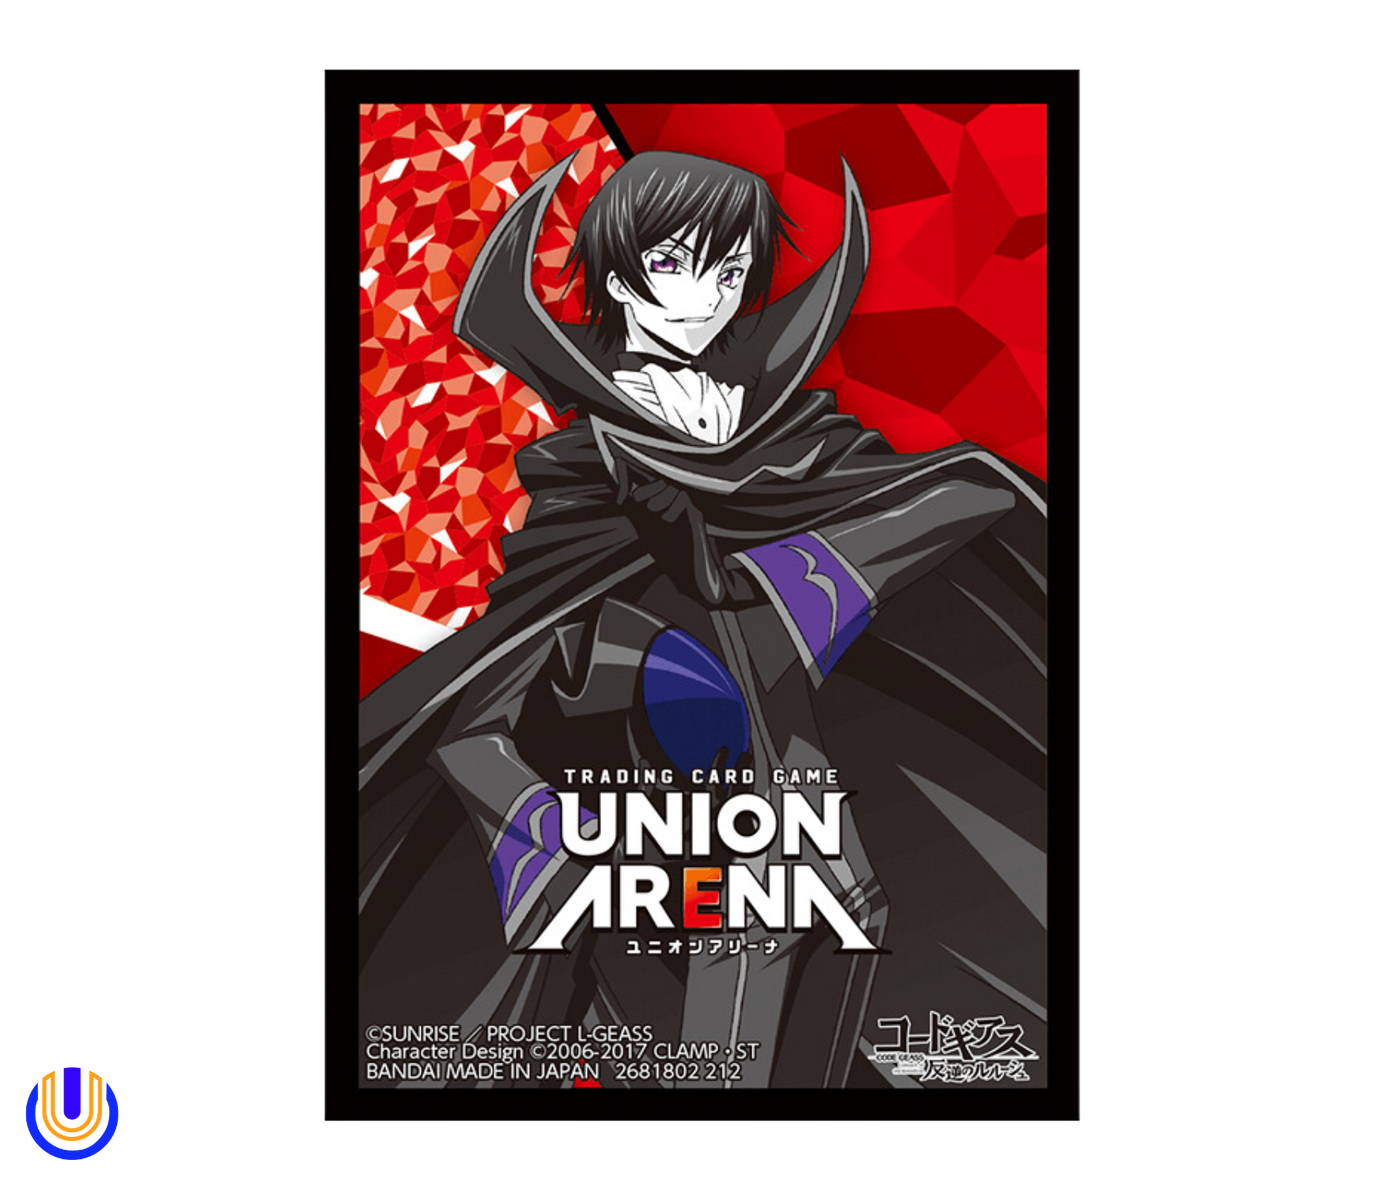 OFFICIAL CARD SLEEVE | CODE GEASS: Lelouch of the Rebellion